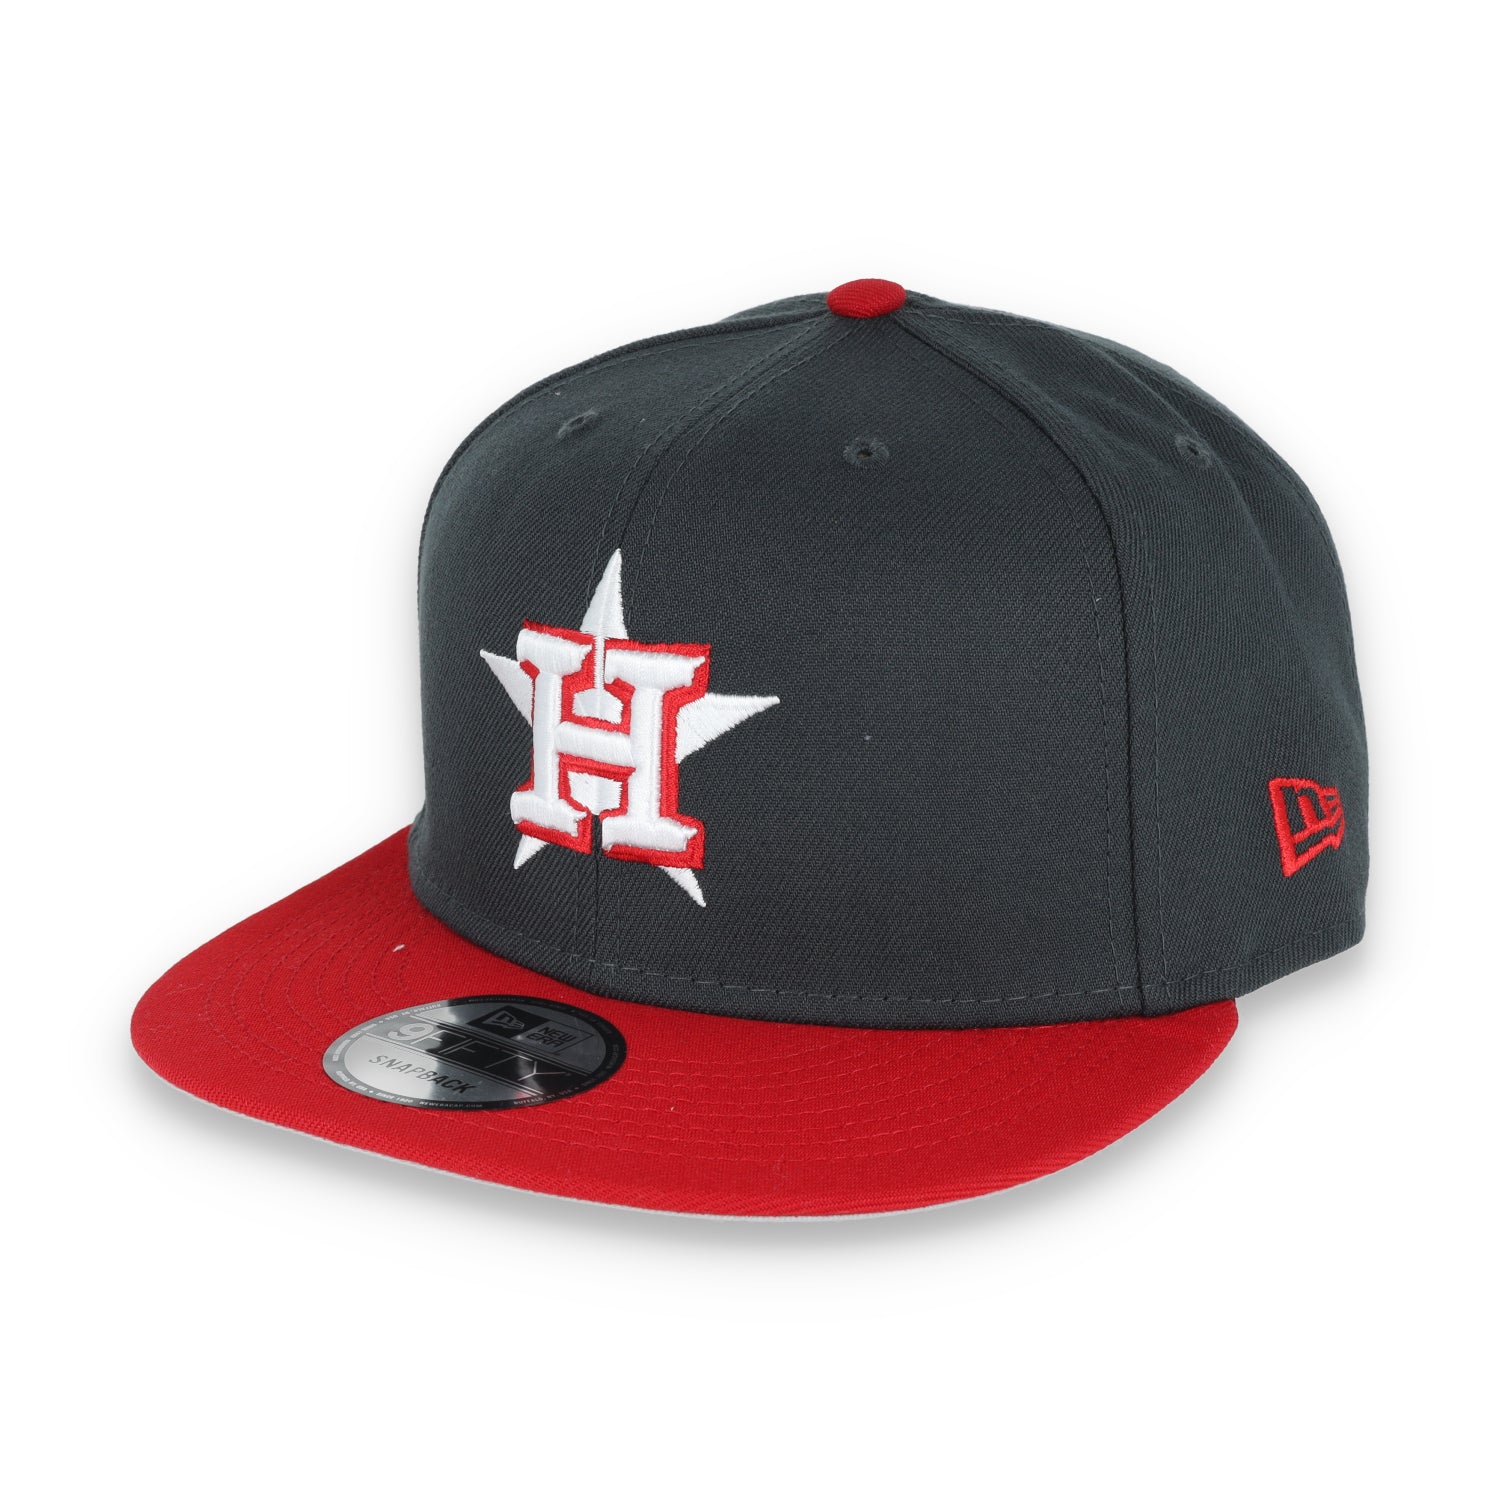 New Era Houston Astros 2-Tone Color Pack 9FIFTY Snapback Hat-Grey/Scarlet